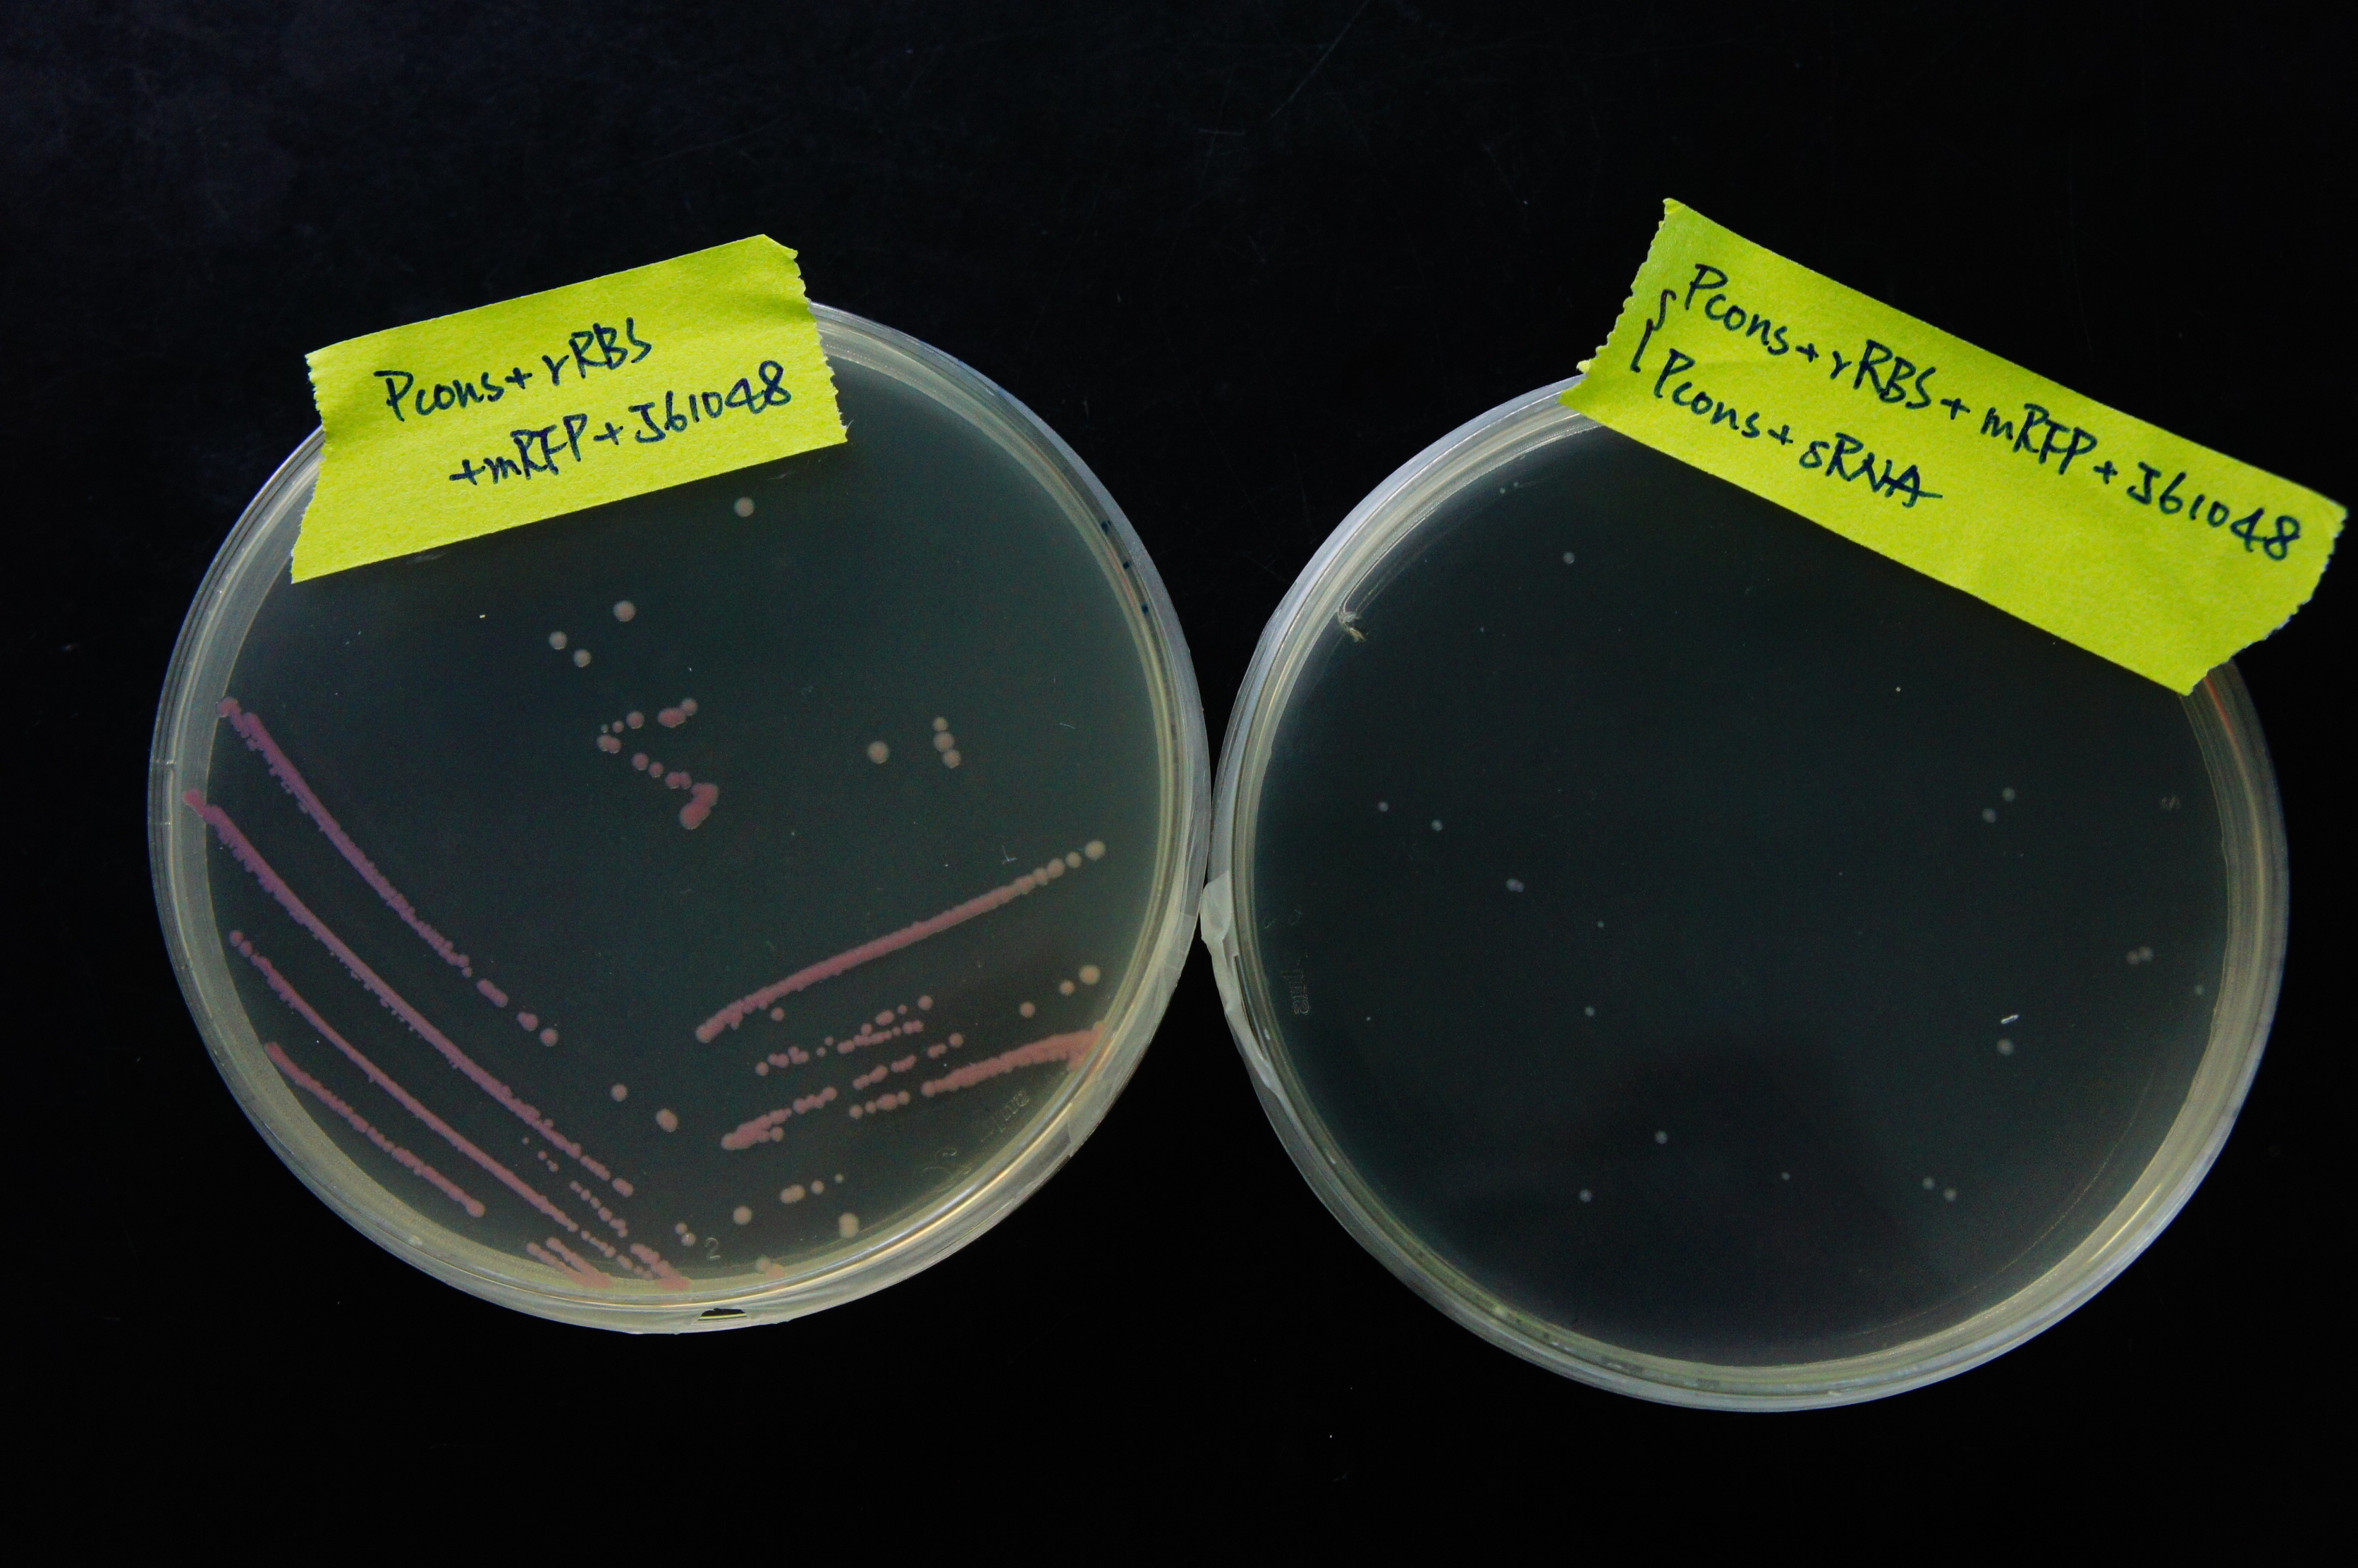 Figure 14. The bacterial colonies with sRNA shows no clear sign of RFP expression, while the colonies without sRNA do.